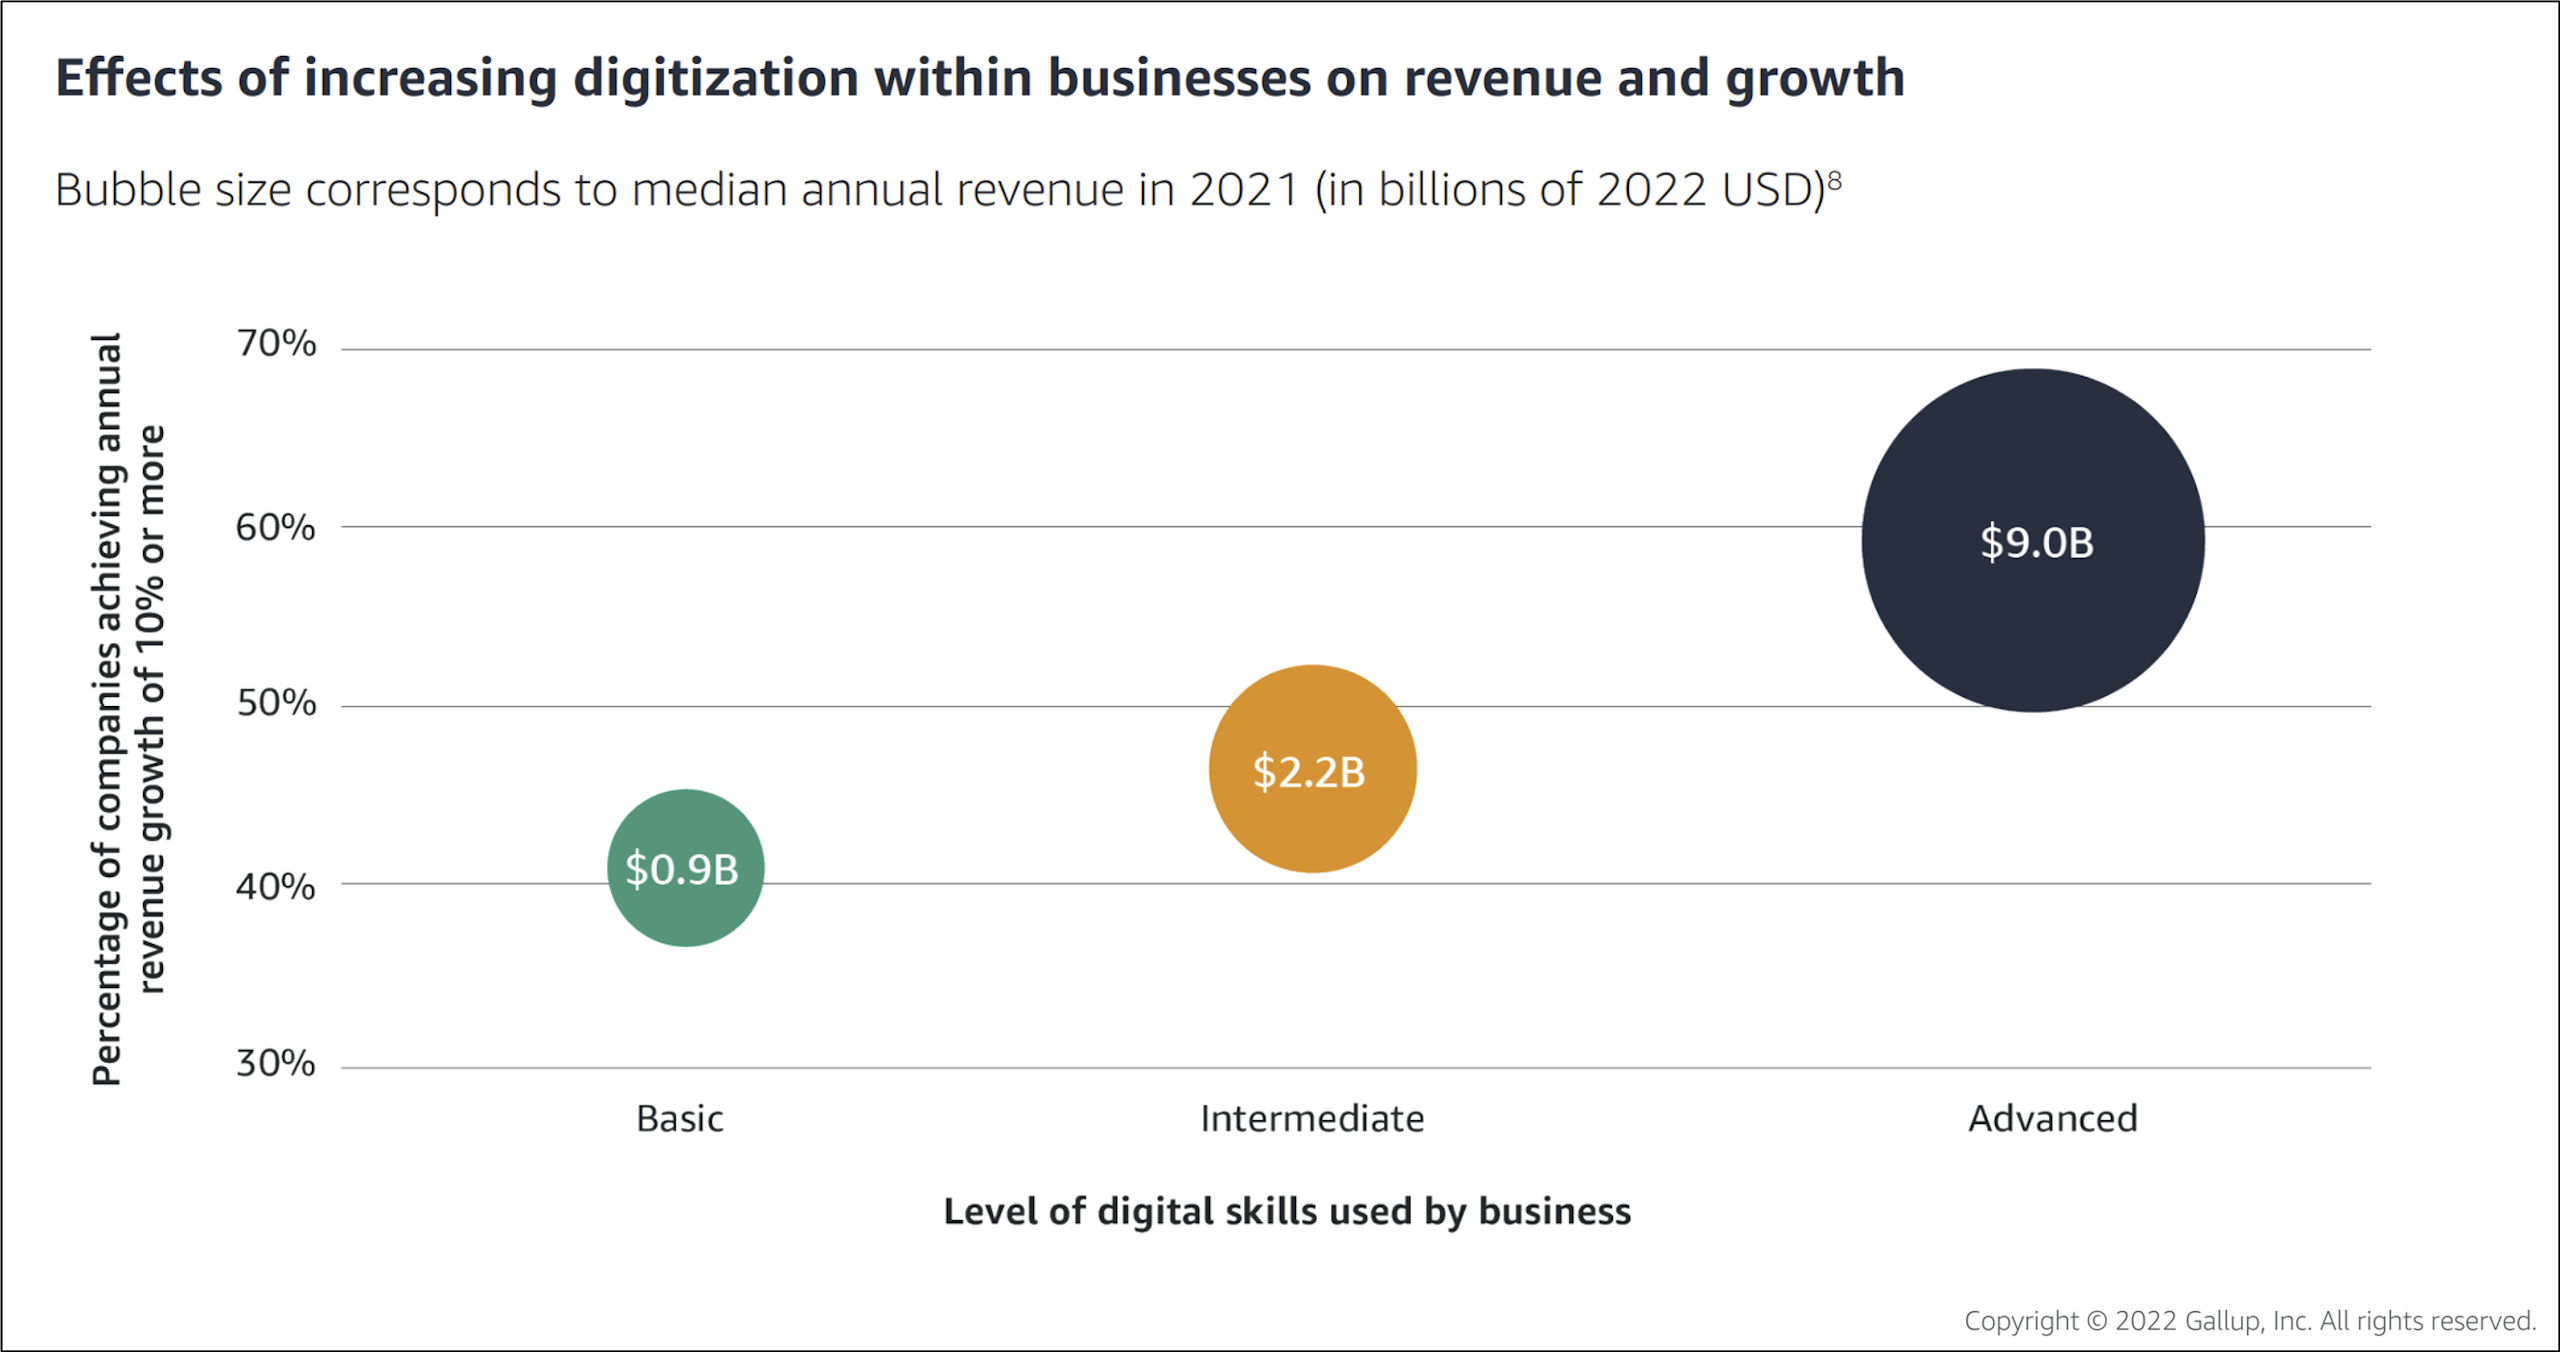 Effects of increasing digitalization within businesses on revenue and growth